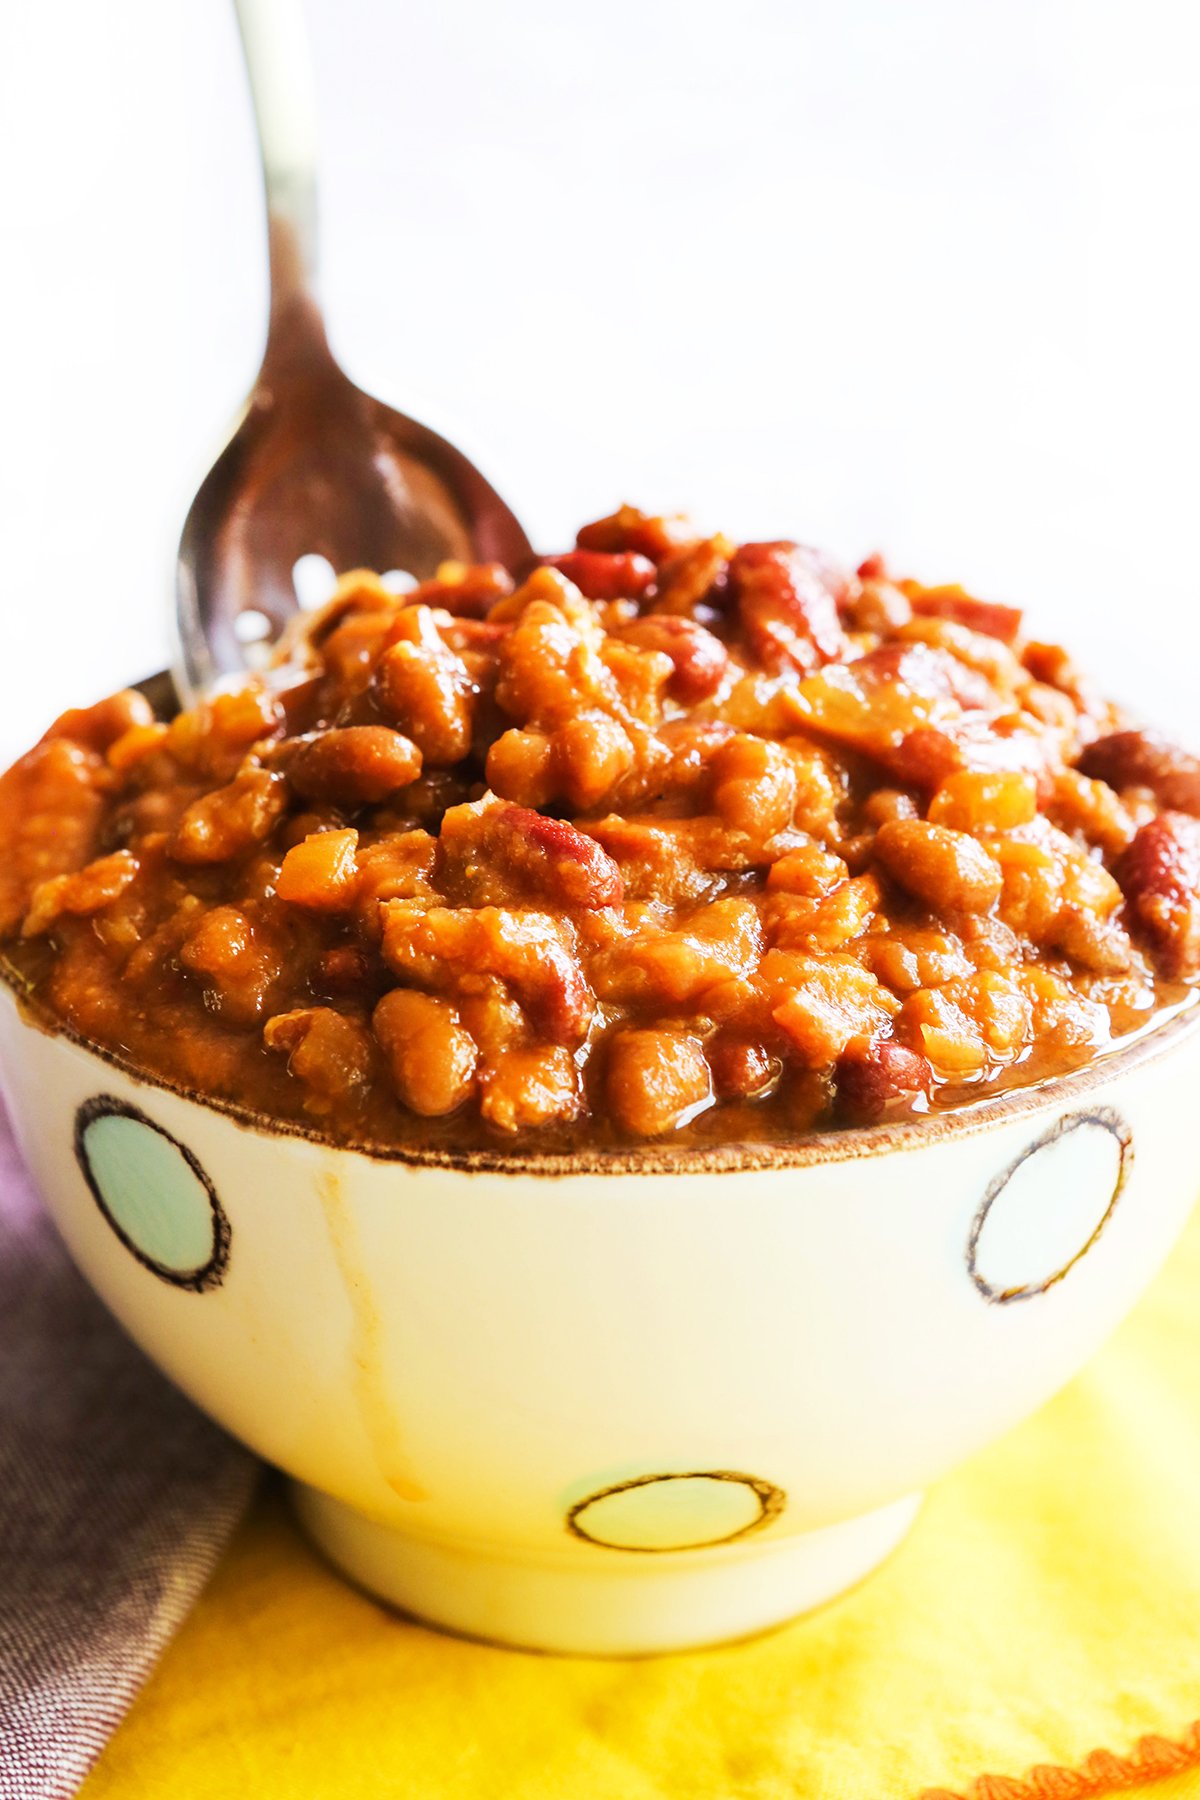 Serving spoon sticking out of a bowl filled with baked beans.